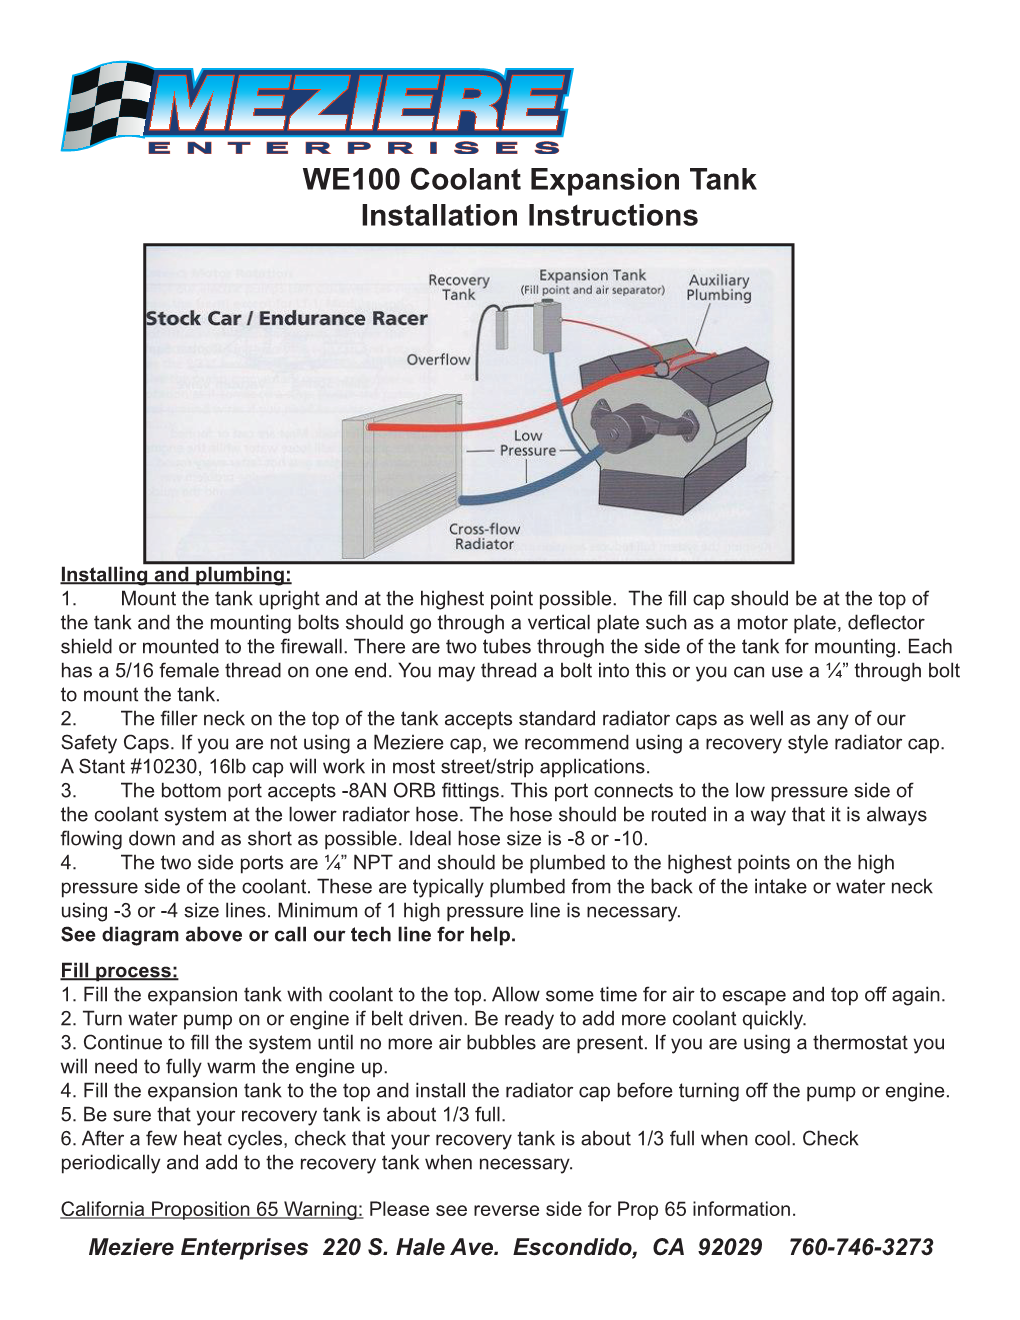 WE100 Coolant Expansion Tank Installation Instructions